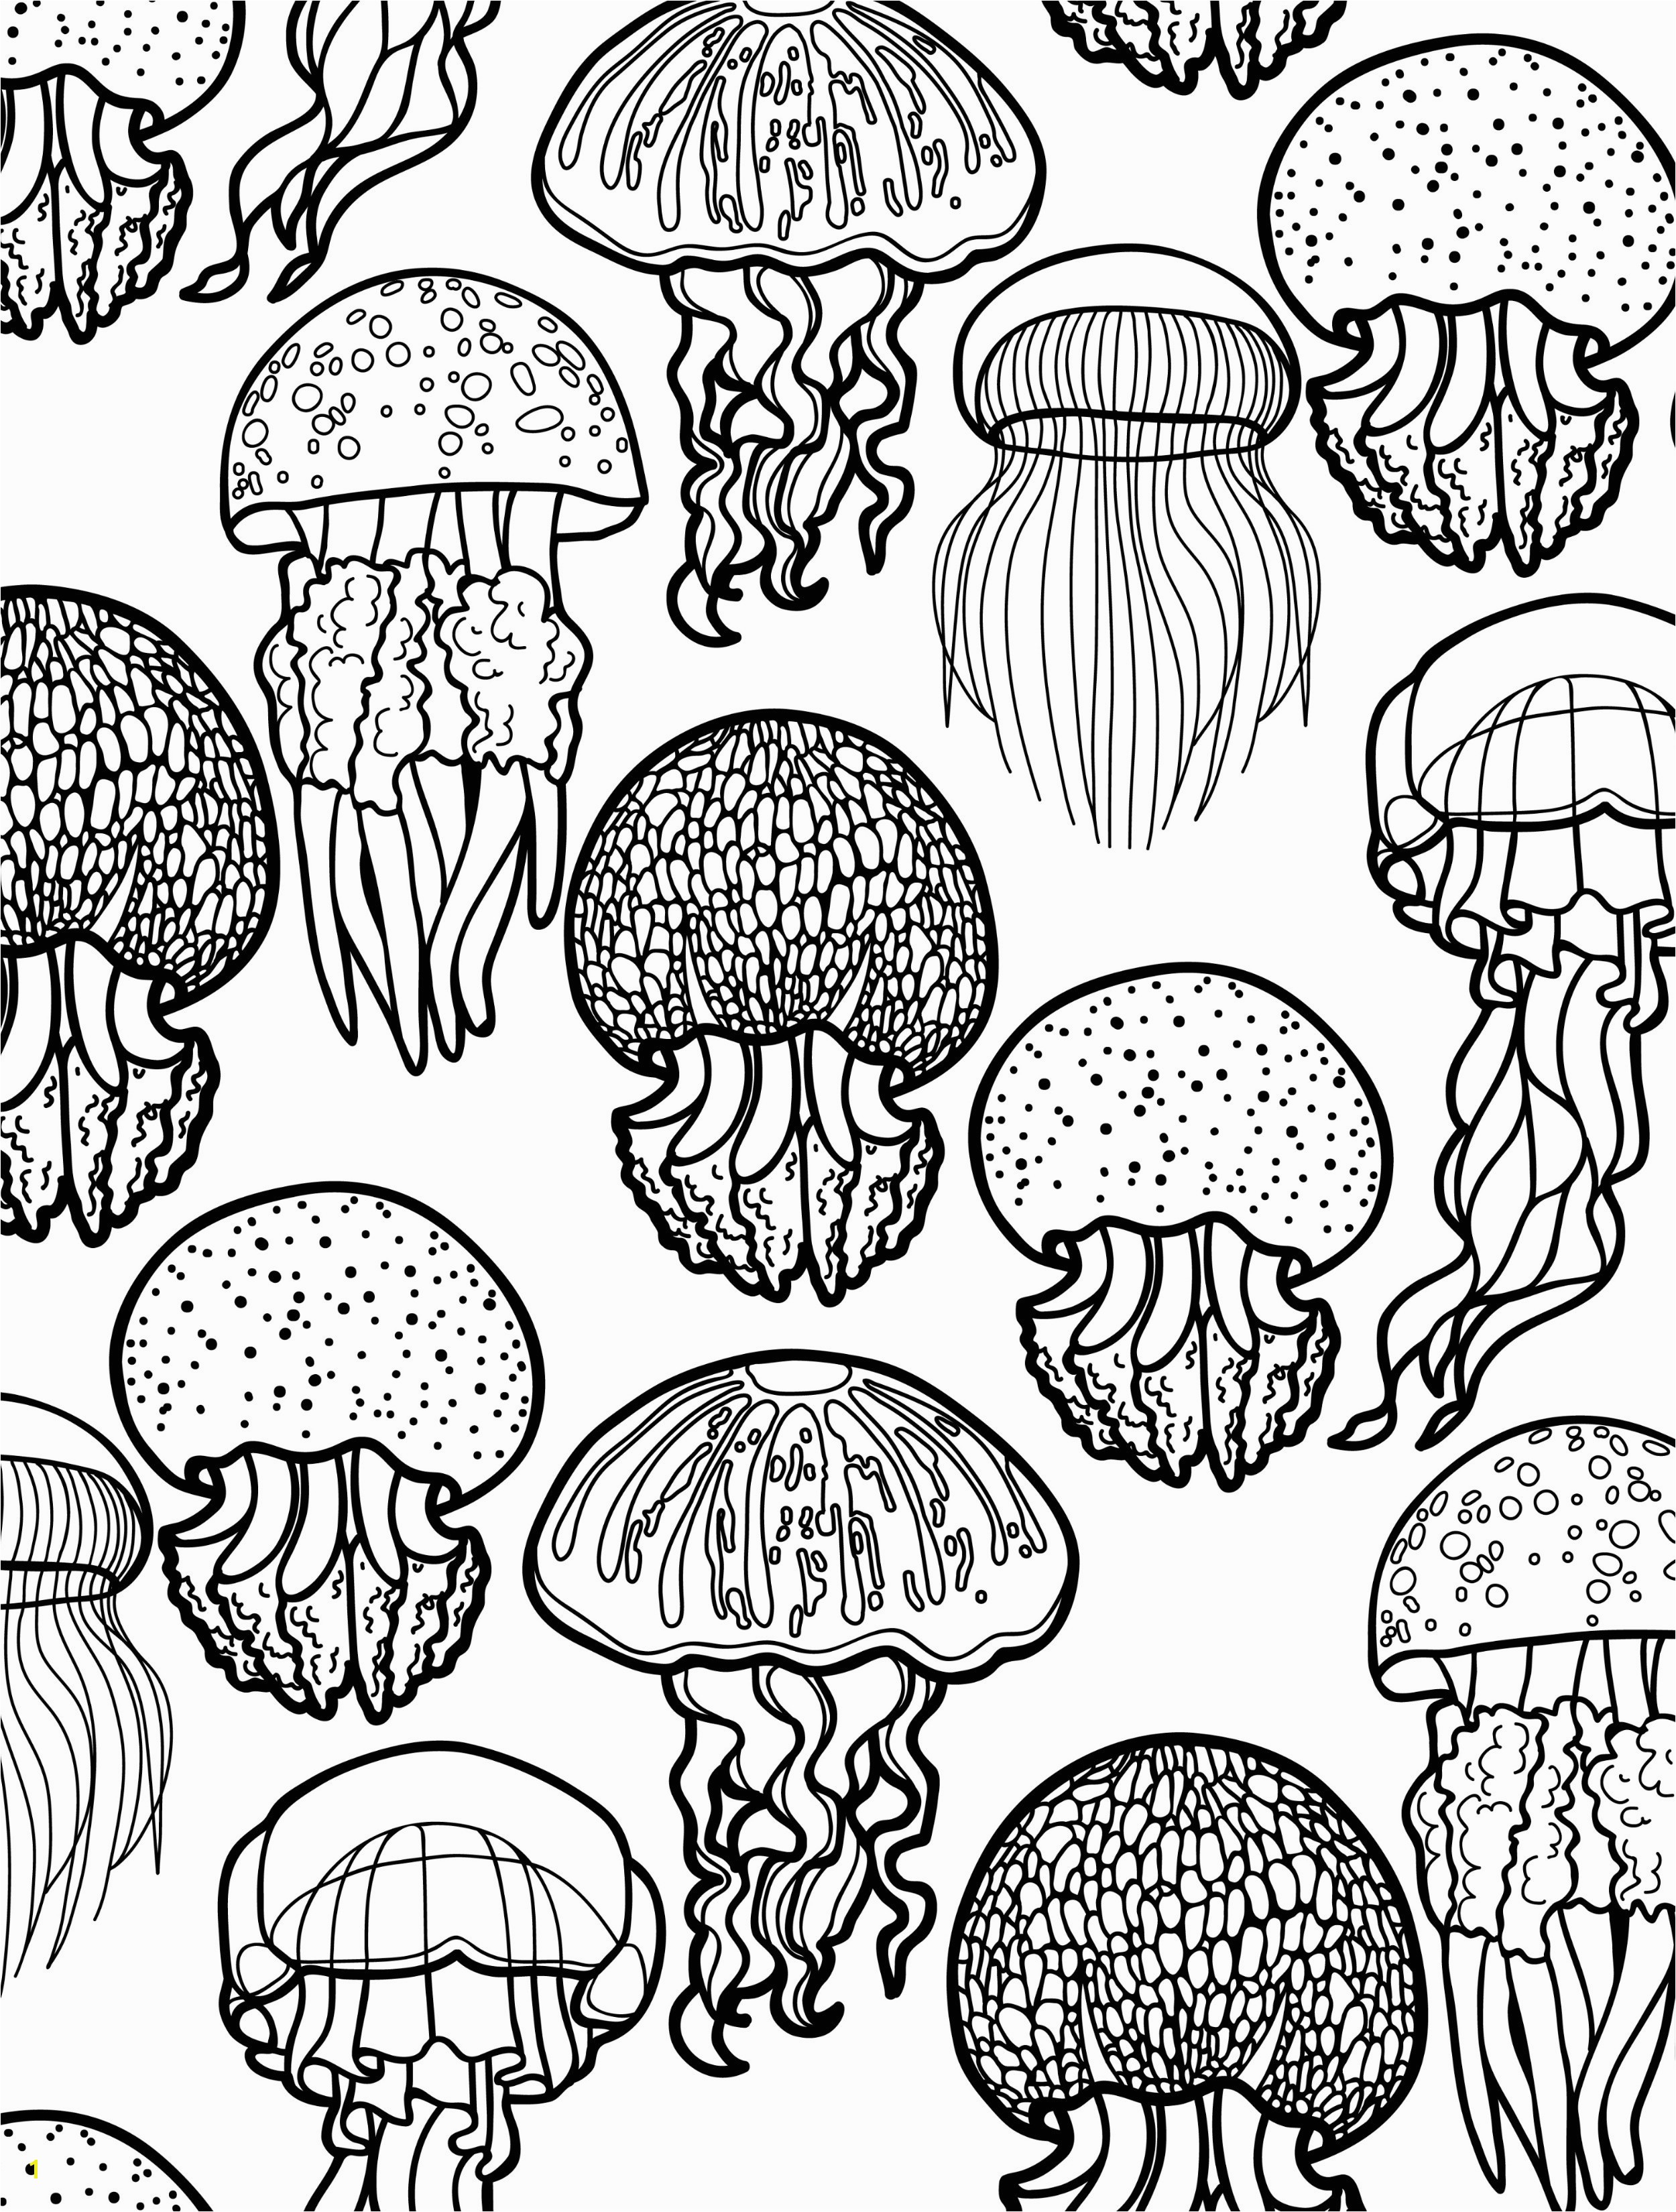 Tree Bark Coloring Pages Ocean Coloring Pages for Adults Ruva